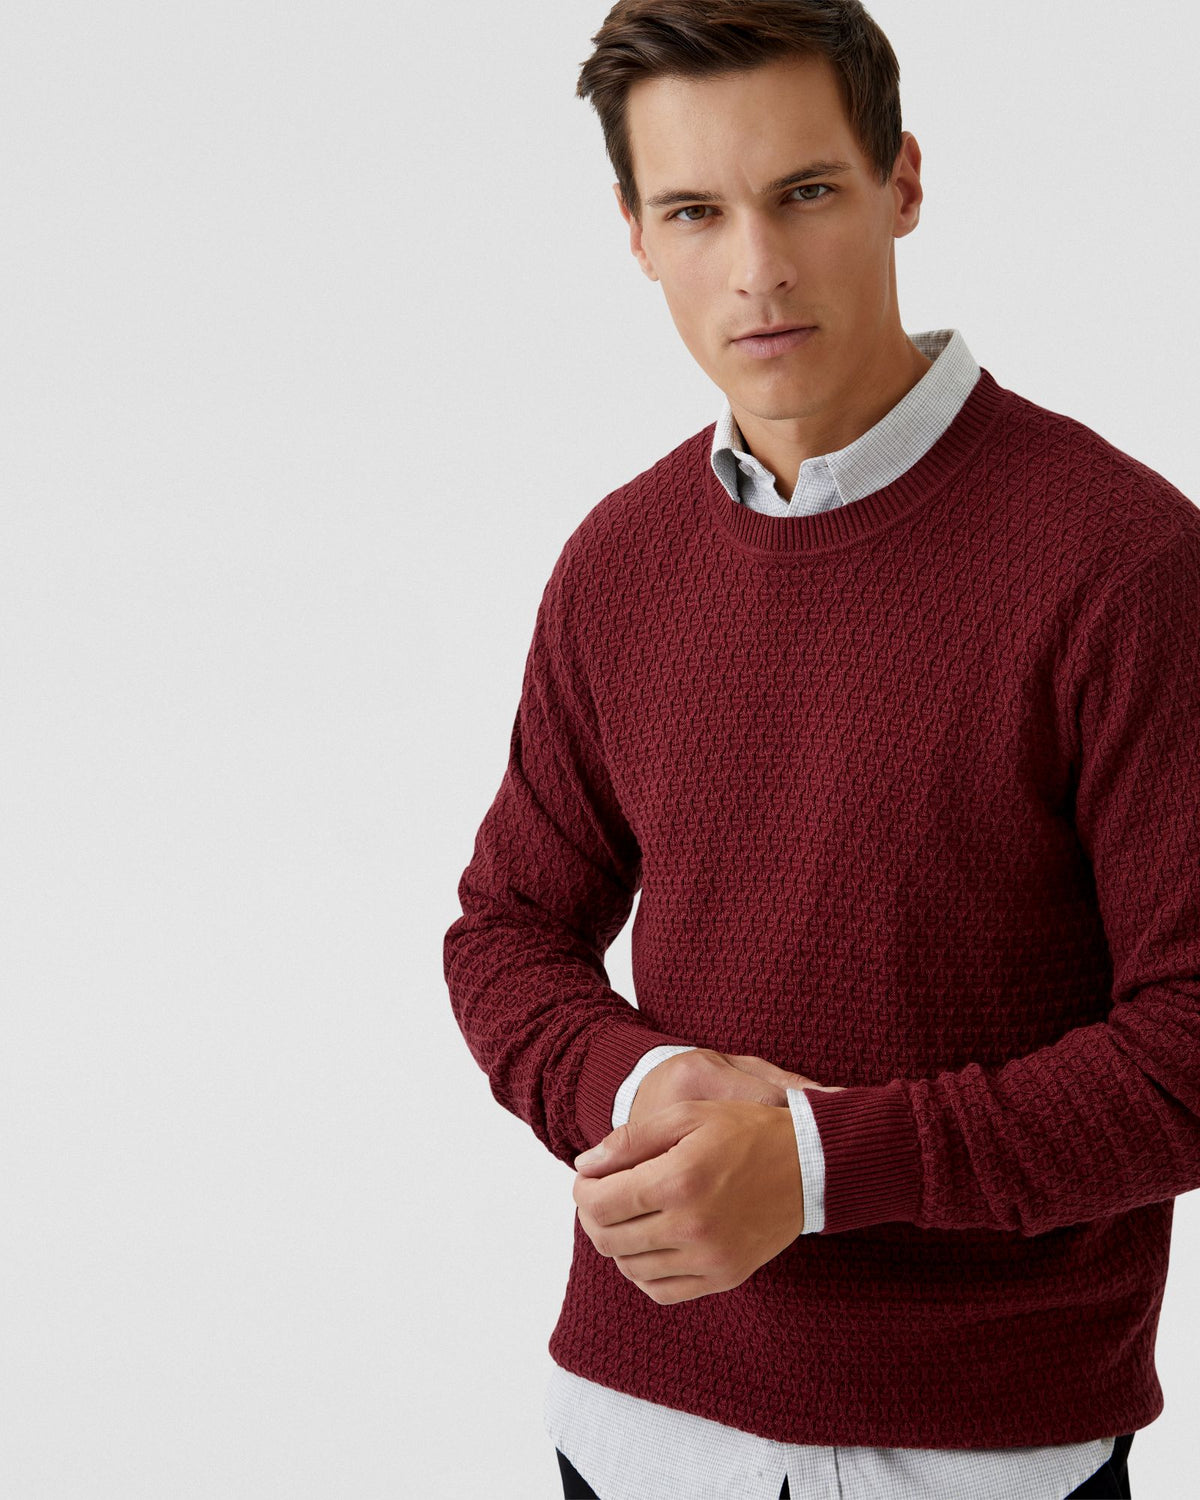 TOBY TEXTURED COTTON KNIT MENS KNITWEAR